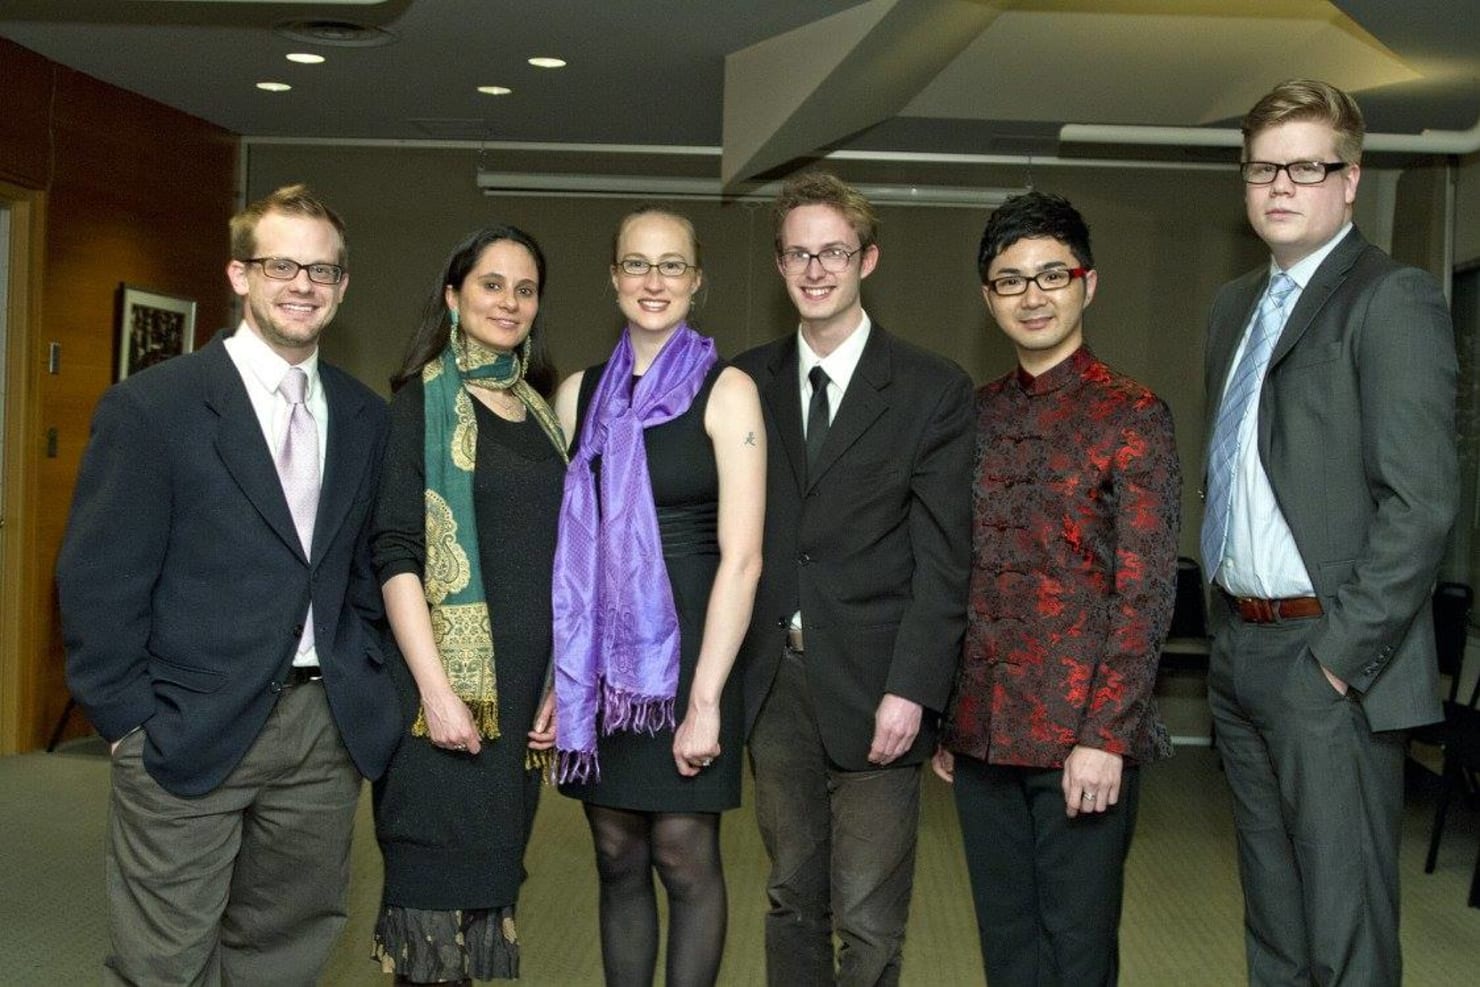 The Minnesota Orchestra Composer Institute entered its second decade in January 2012 with the 11th annual program. Pictured in the Orchestra Hall Green Room are composer participants Brian Ciach, Andreia Pinto-Correia, Hannah Lash, Adrian Knight, Shen Yiwen and Michael R. Holloway.